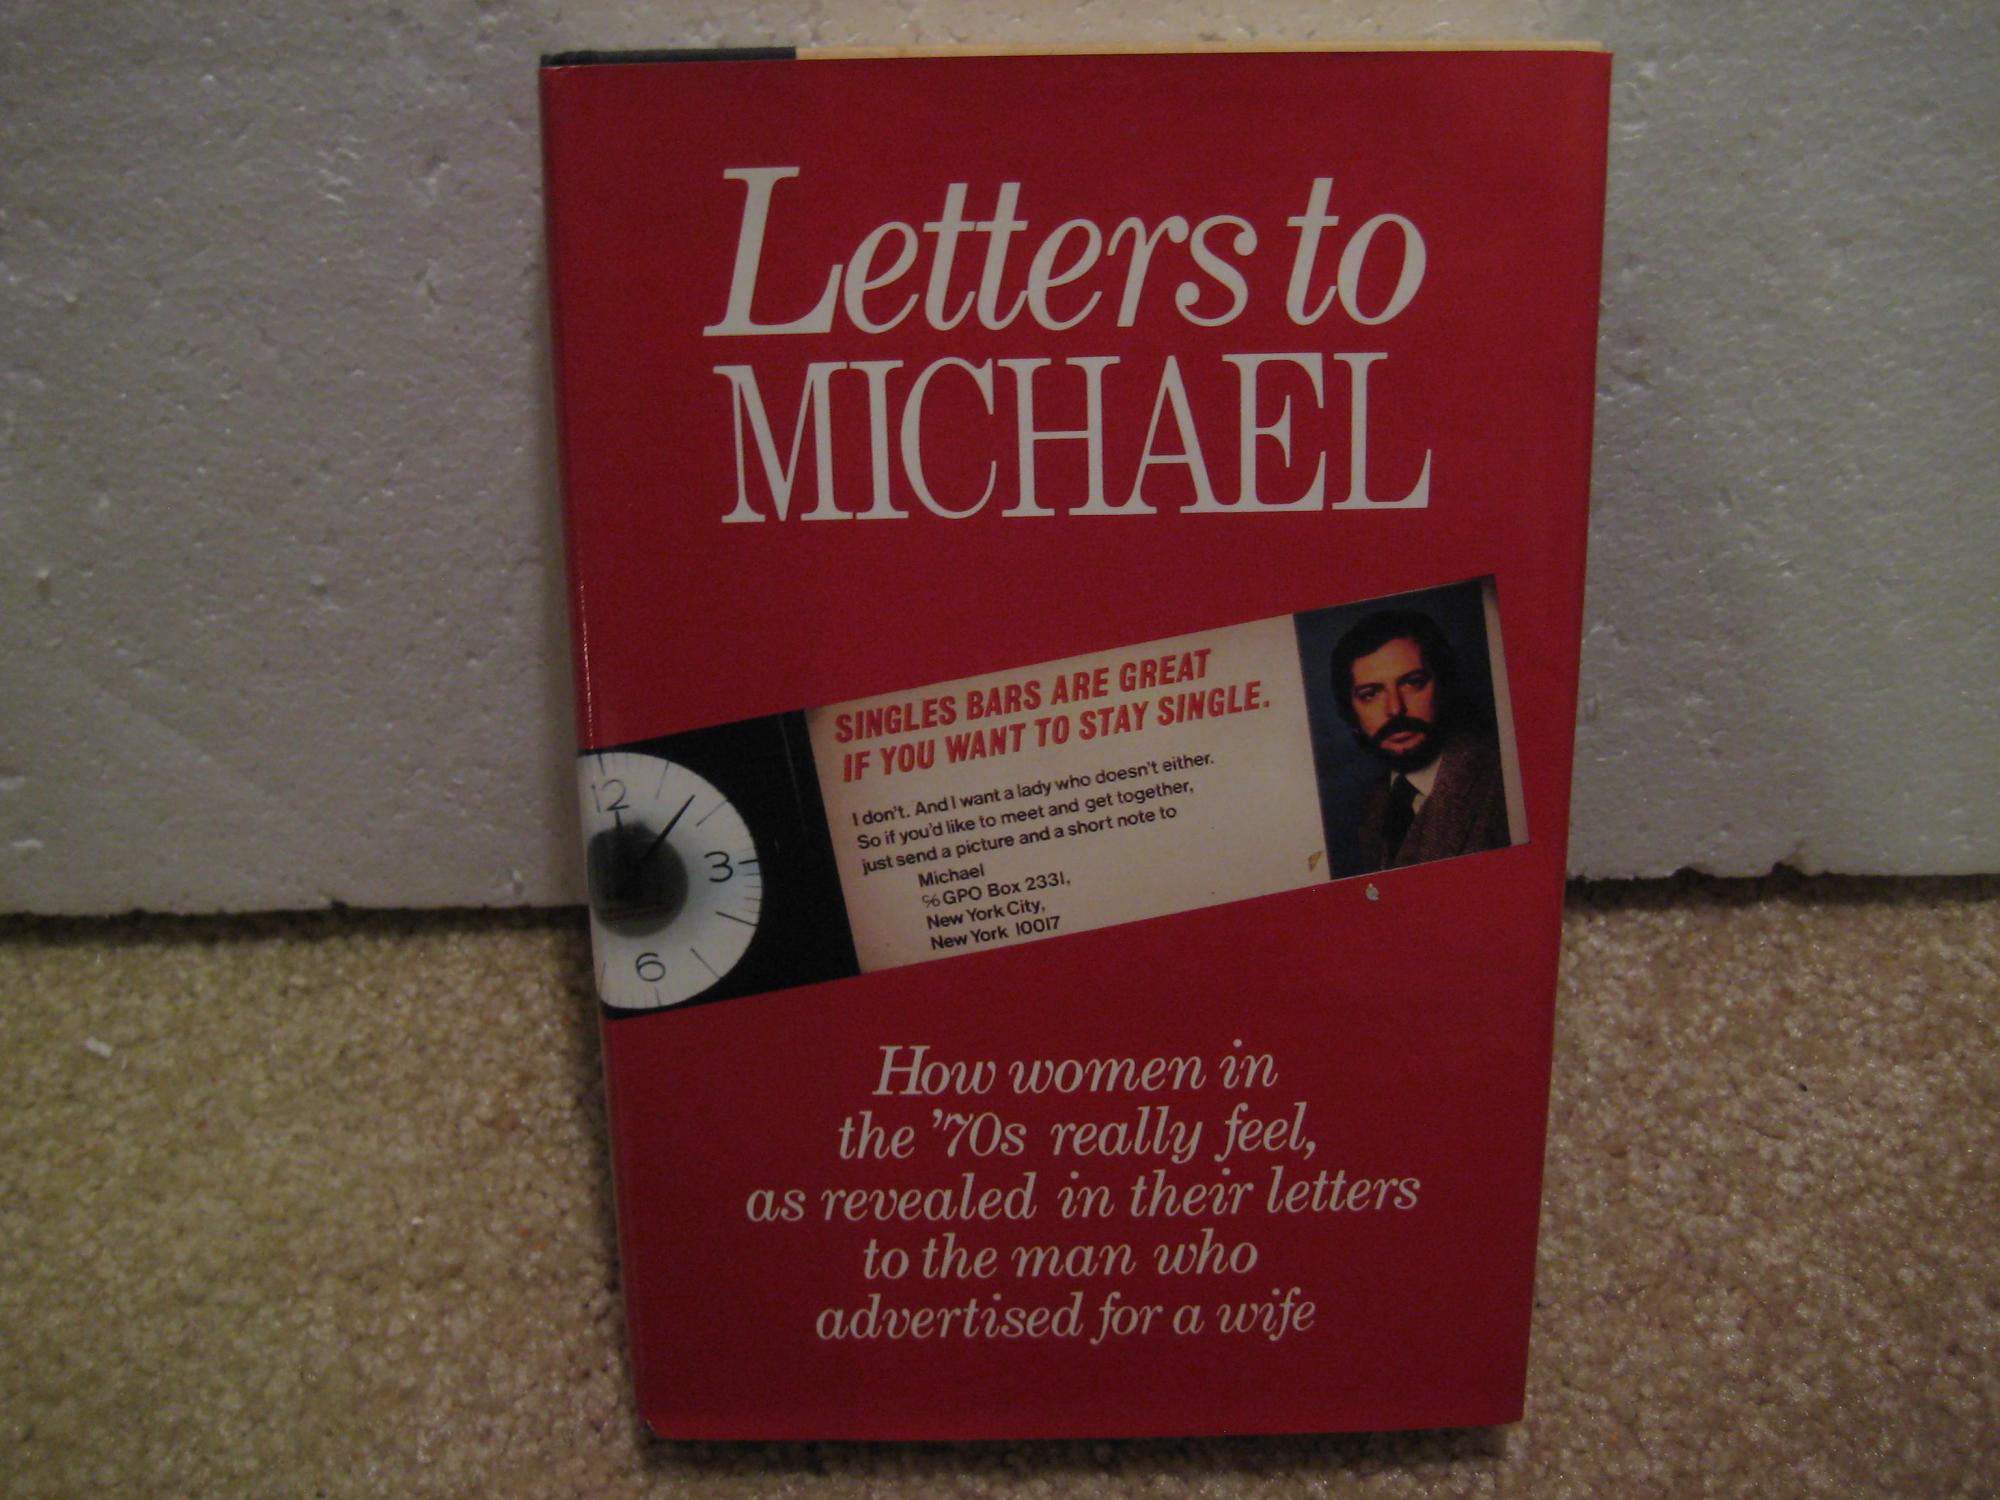 Letters to Michael: How Women in the '70s Really Feel, As Revealed in Their Letters to the Man Who Advertised for a Wife